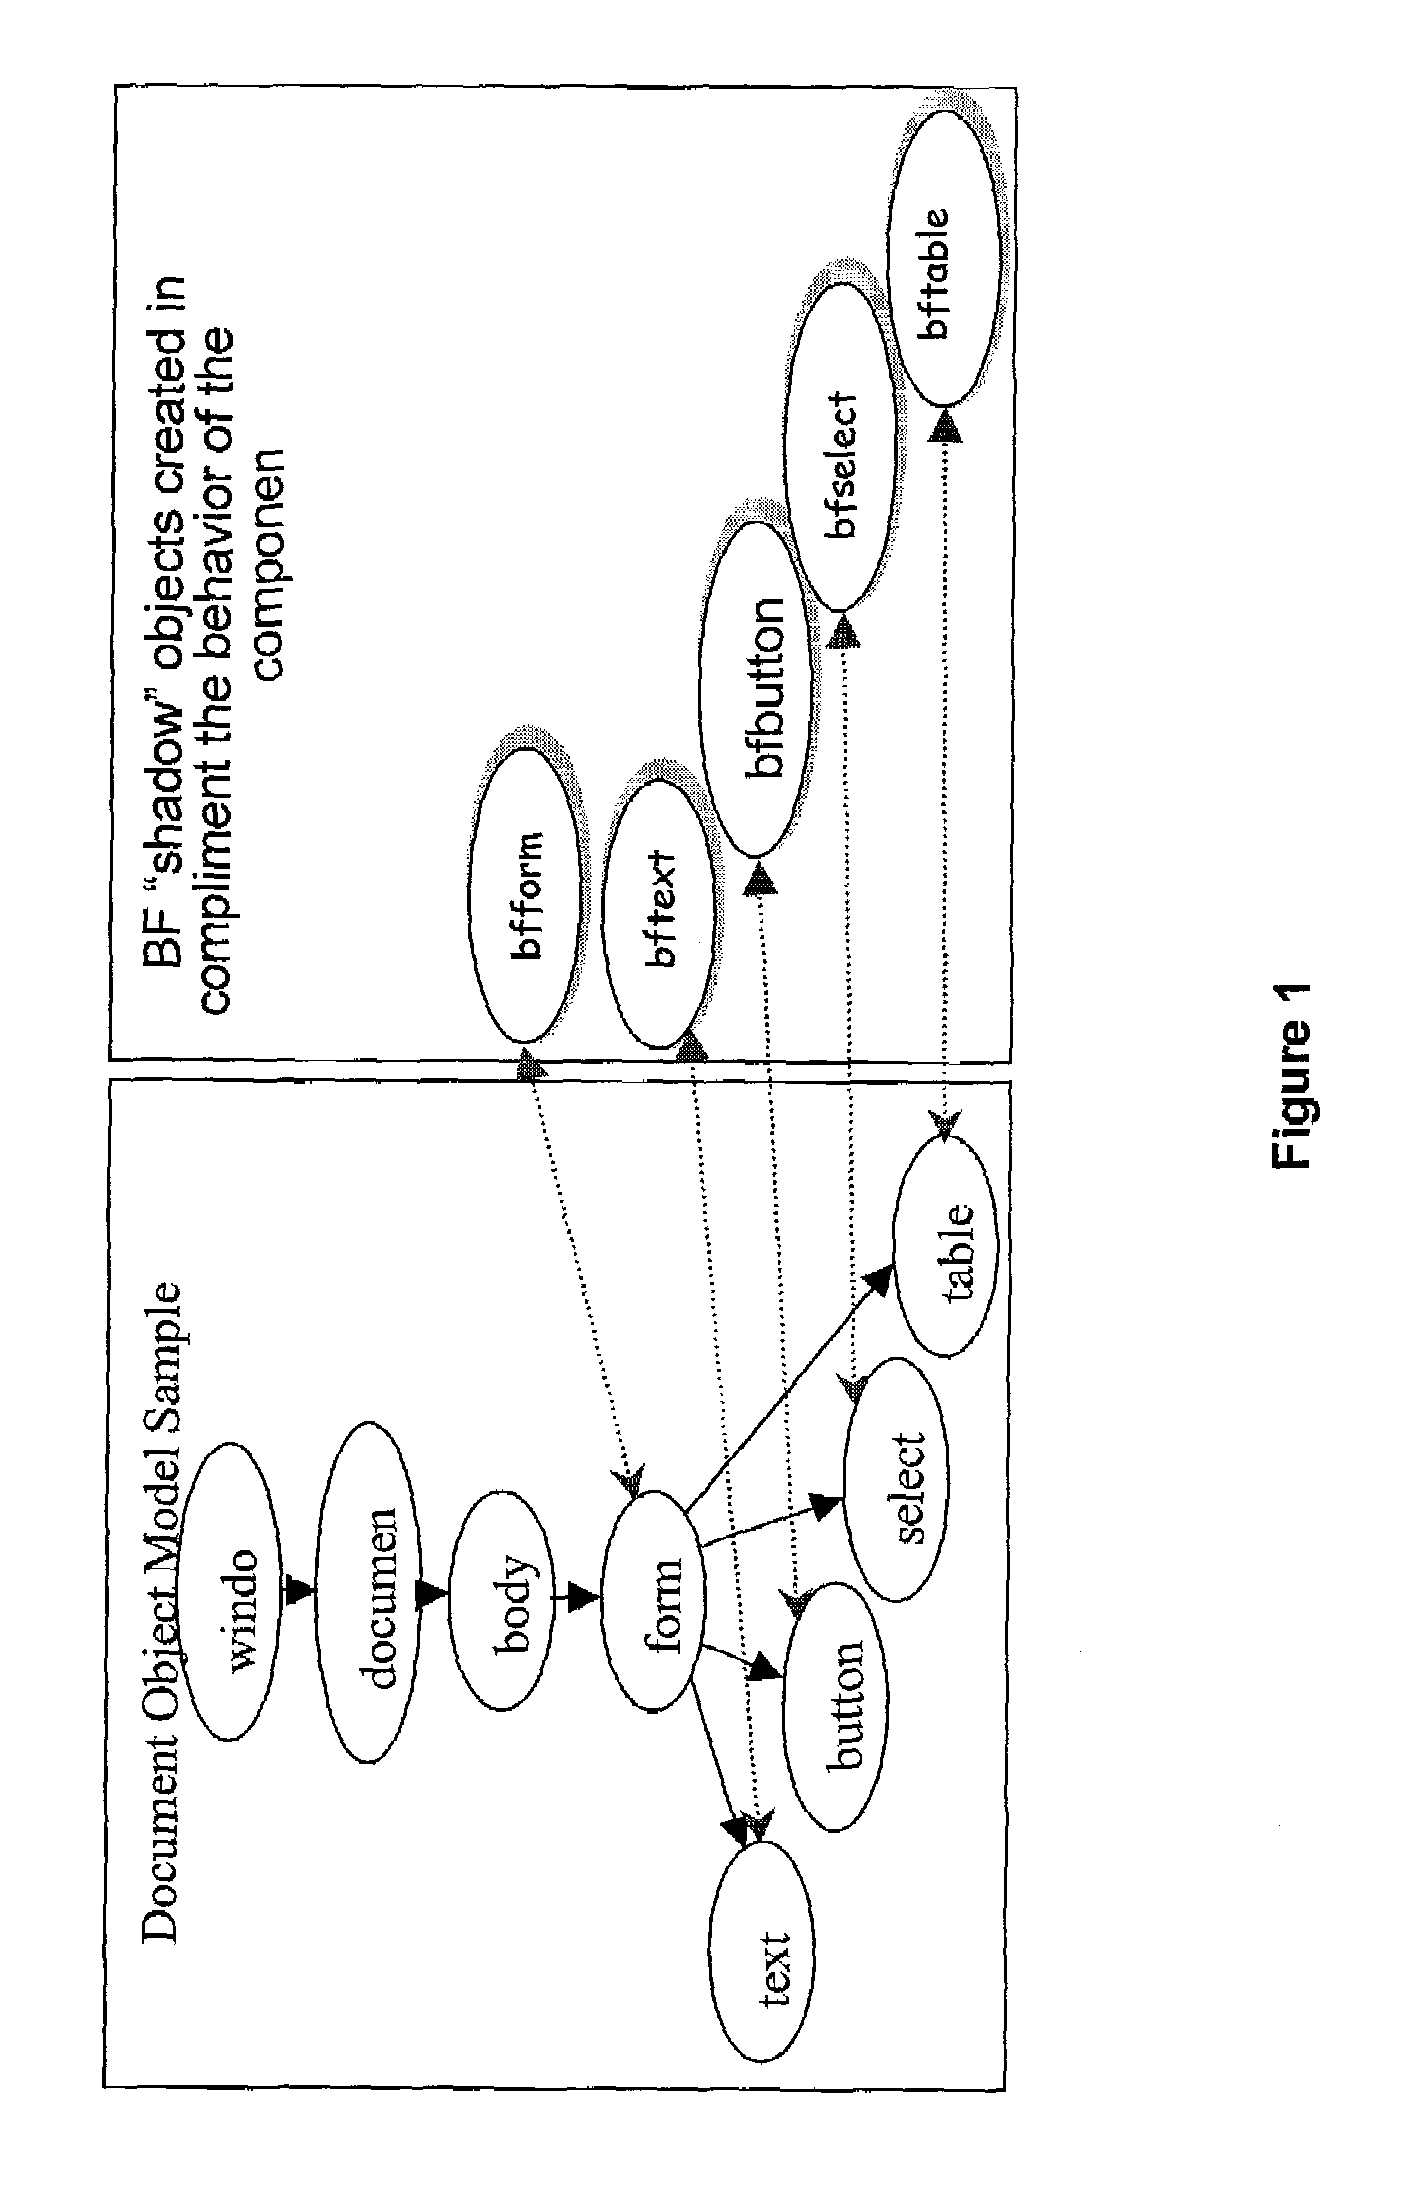 Method for creating browser-based user interface applications using a framework